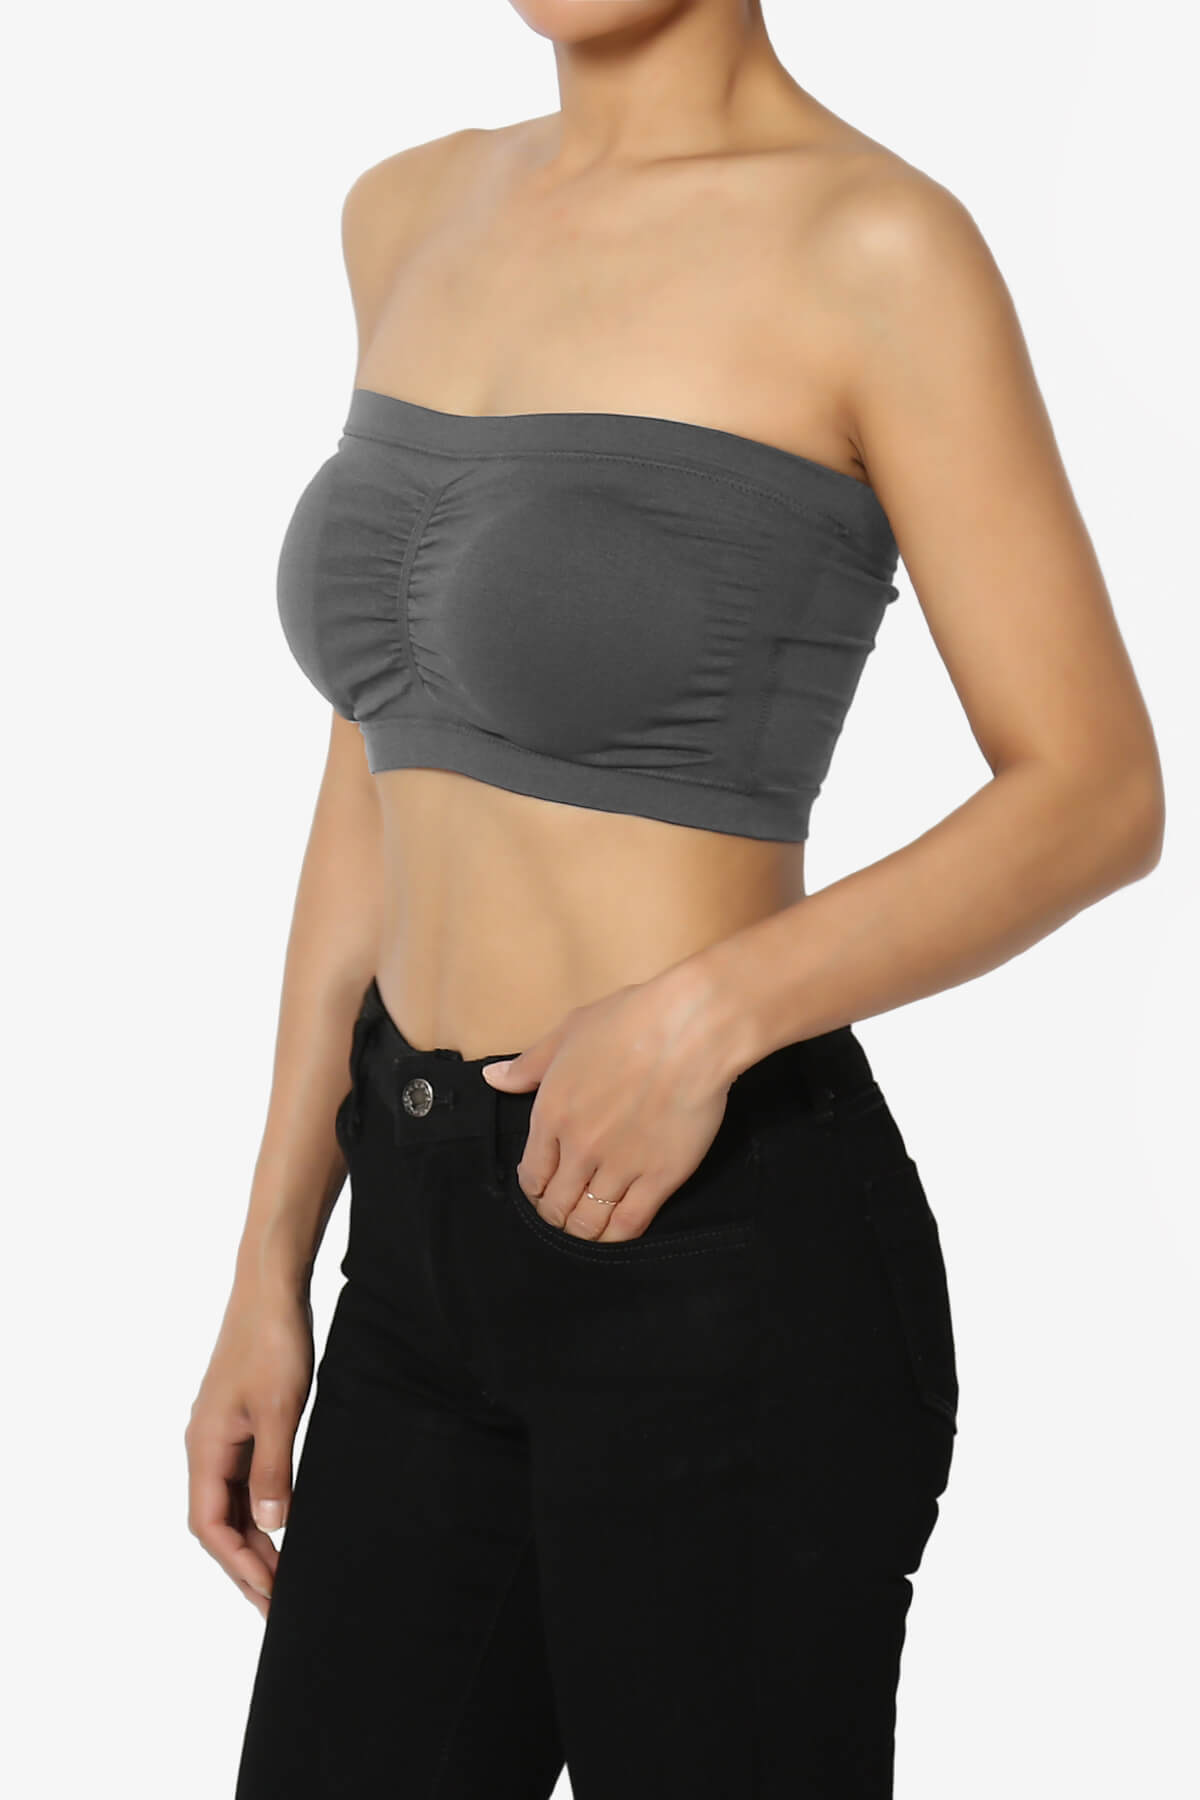 Geyoga 6 Pieces Strapless Bandeau Bra Seamless Bralettes Tube Bra Stretchy  Non-Padded Bandeau Tube Bra for Women, Black, Beige, White, Gray, Charcoal  Gray, Olive Green, L price in UAE,  UAE